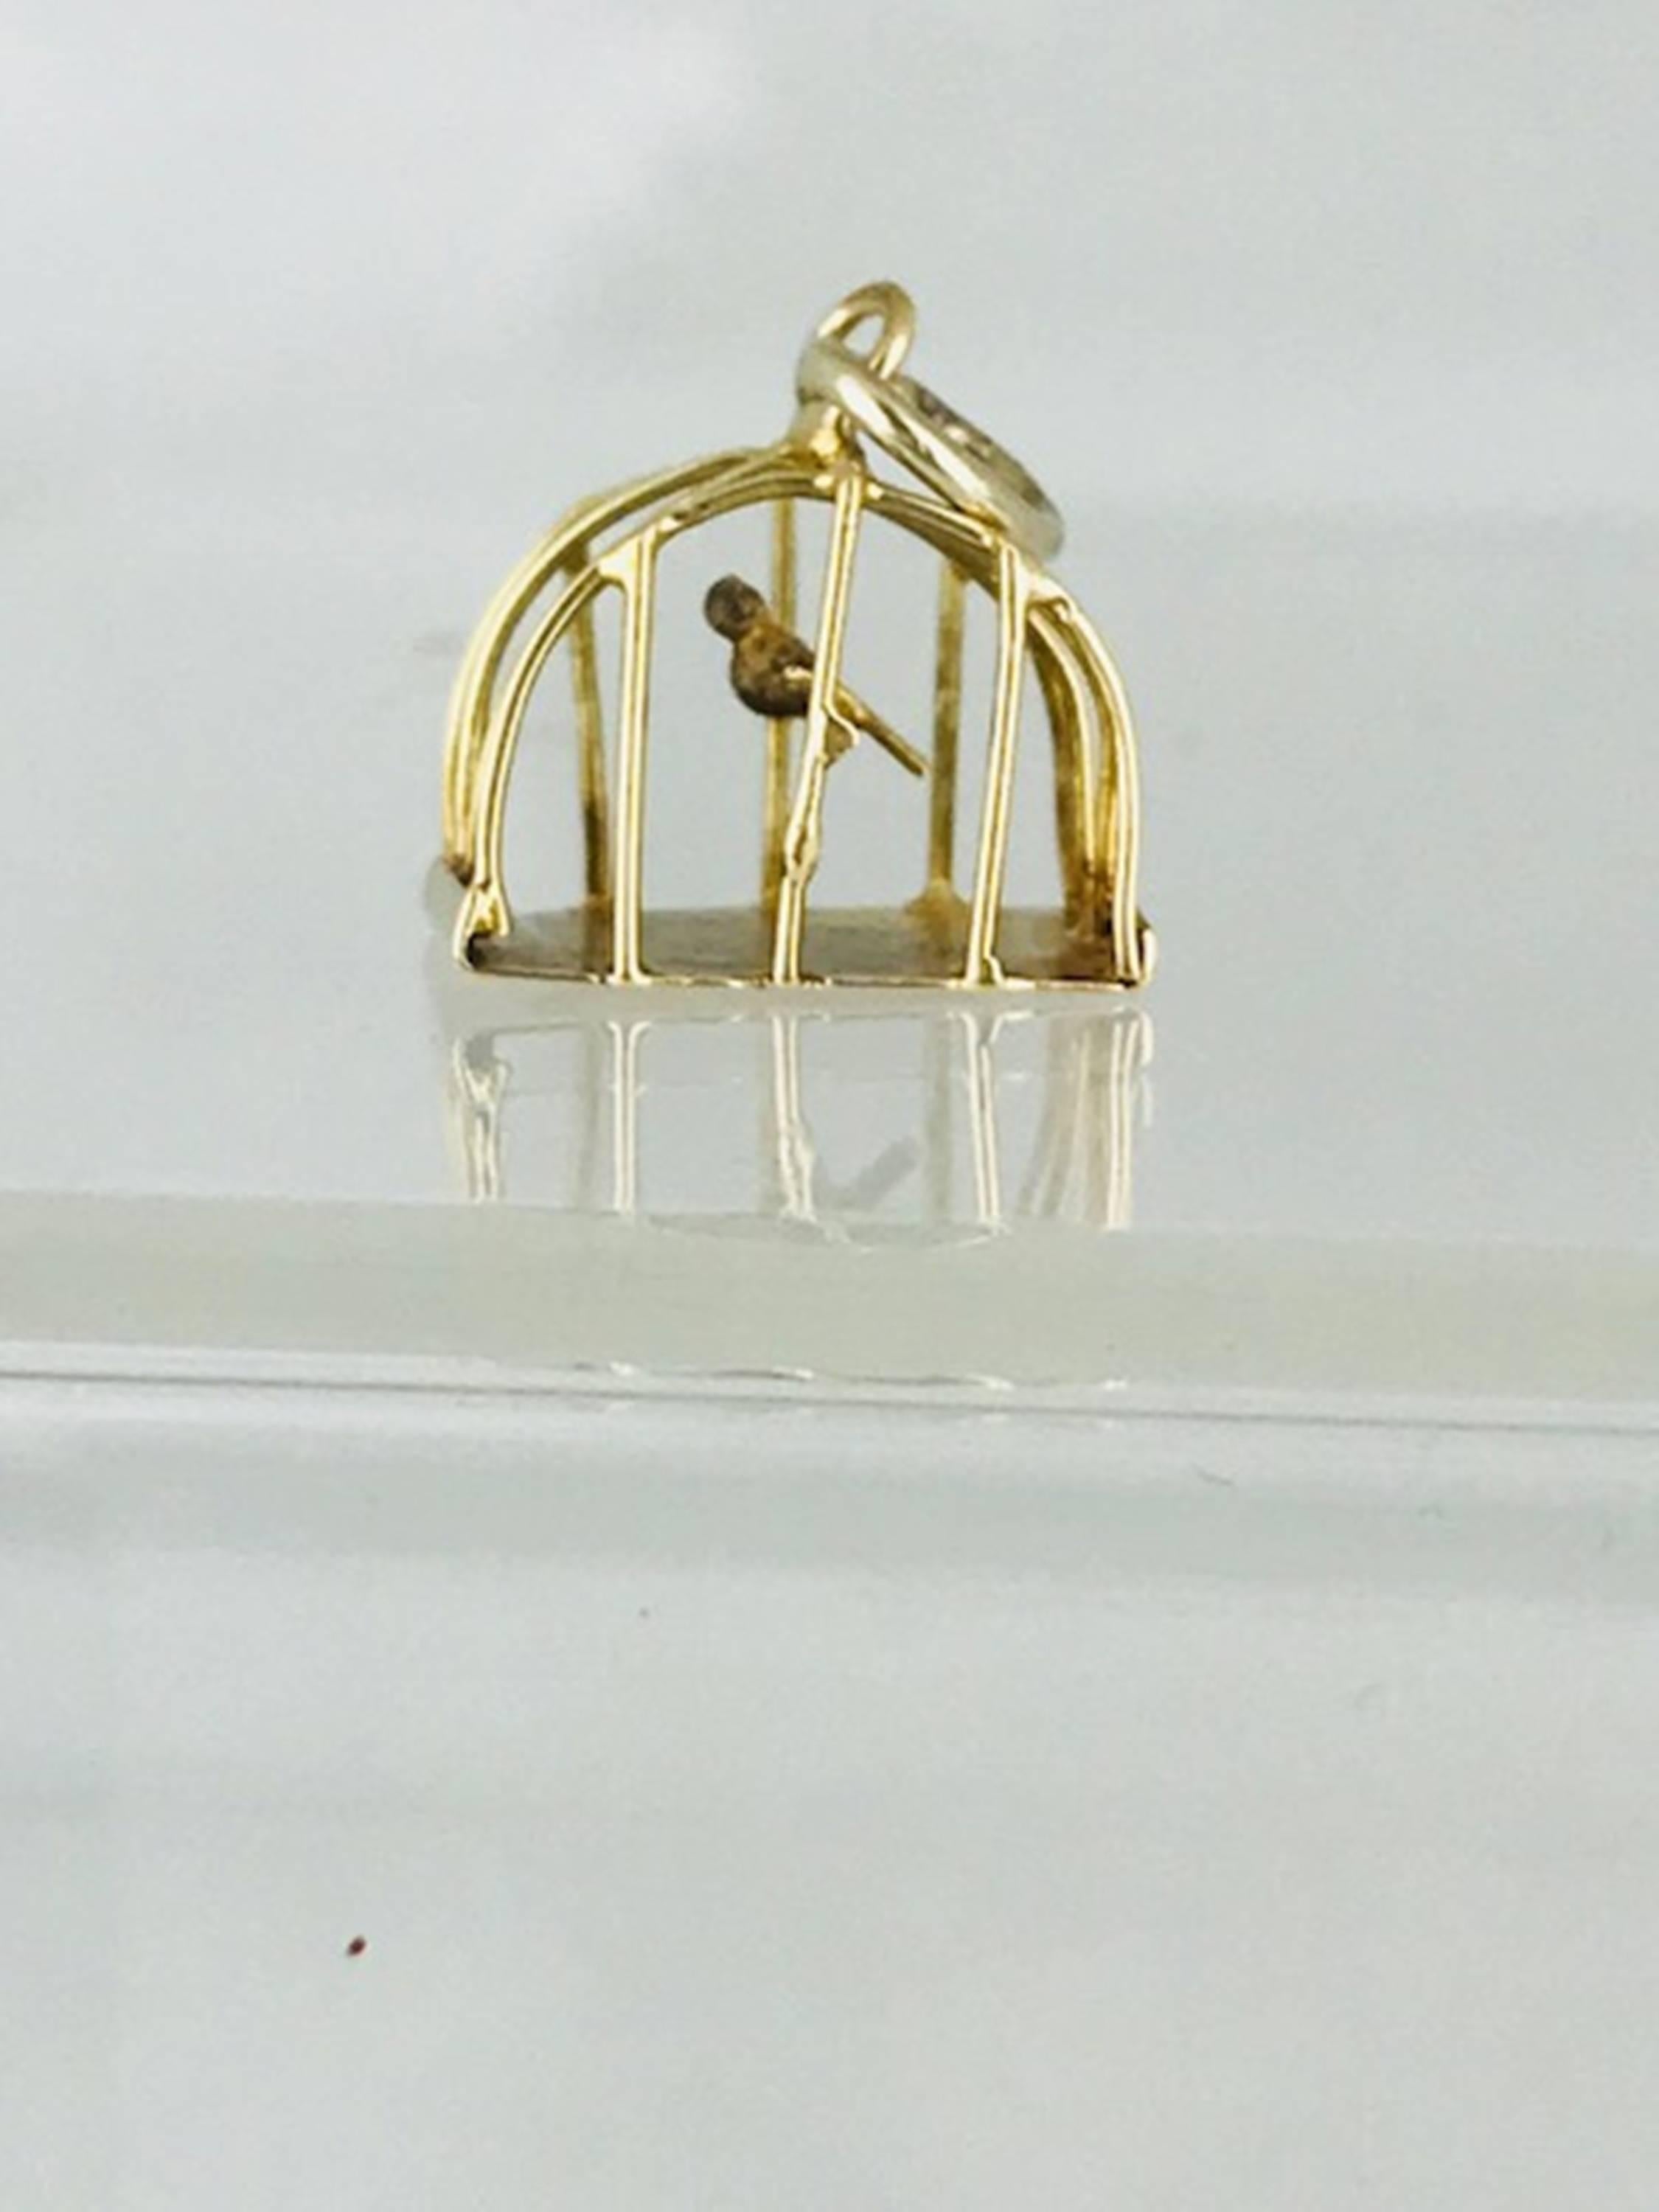 Bird in a cage, 14 Karat Yellow Gold, Circa 1950's
Vintage, unique and hard to find Bird-Cage can be used for charm bracelet or necklace

GIA Gemologist, inspected & evaluated